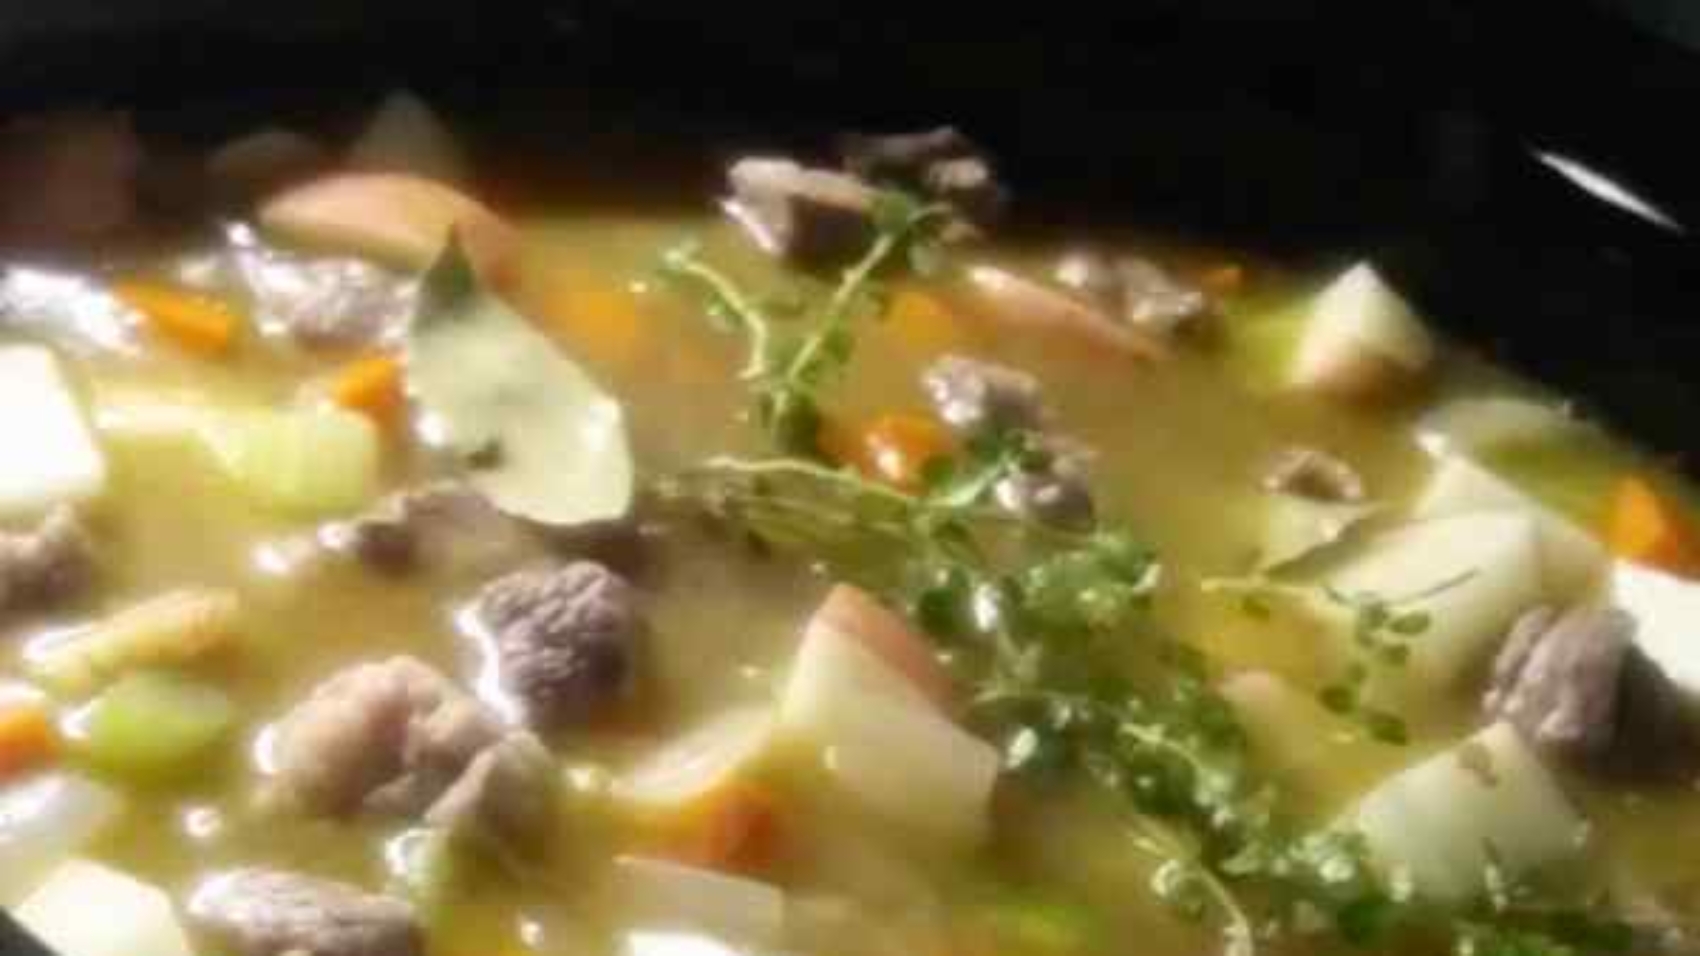 beef stew with vegetables potatoes and herbs sitting in a crock pot